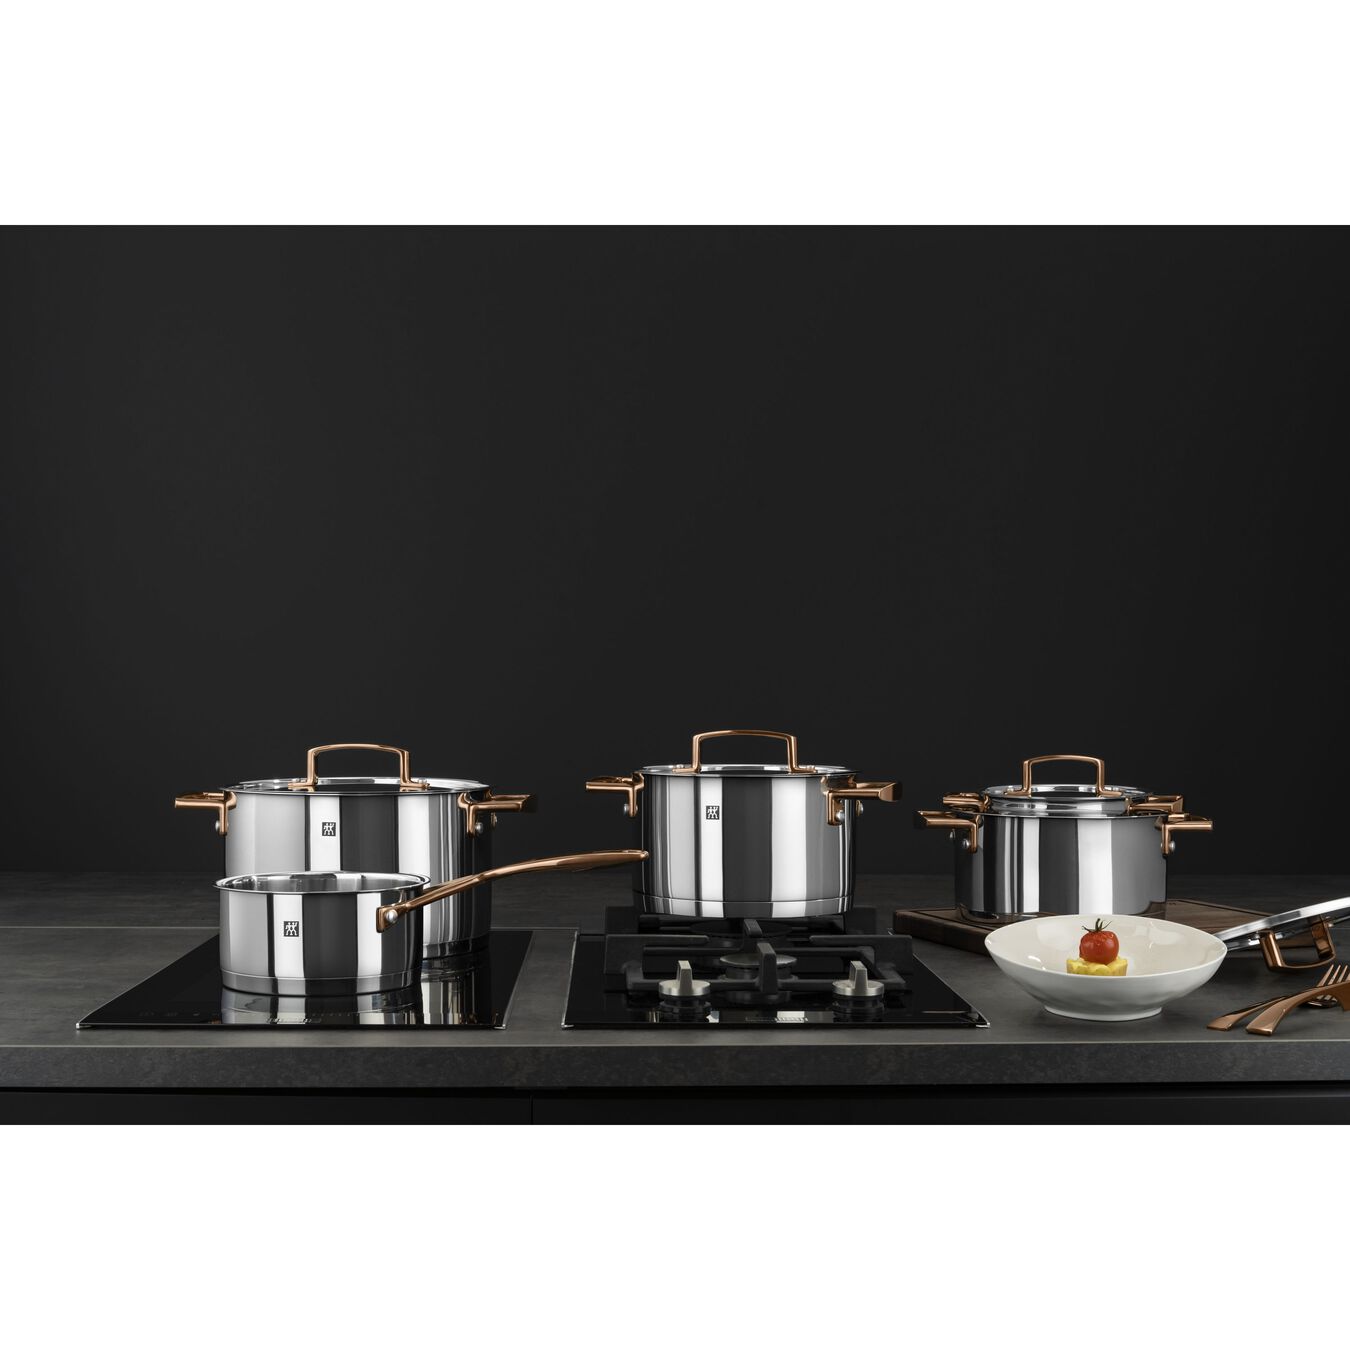 Pots and pans set 5-pcs, 18/10 Stainless Steel,,large 7